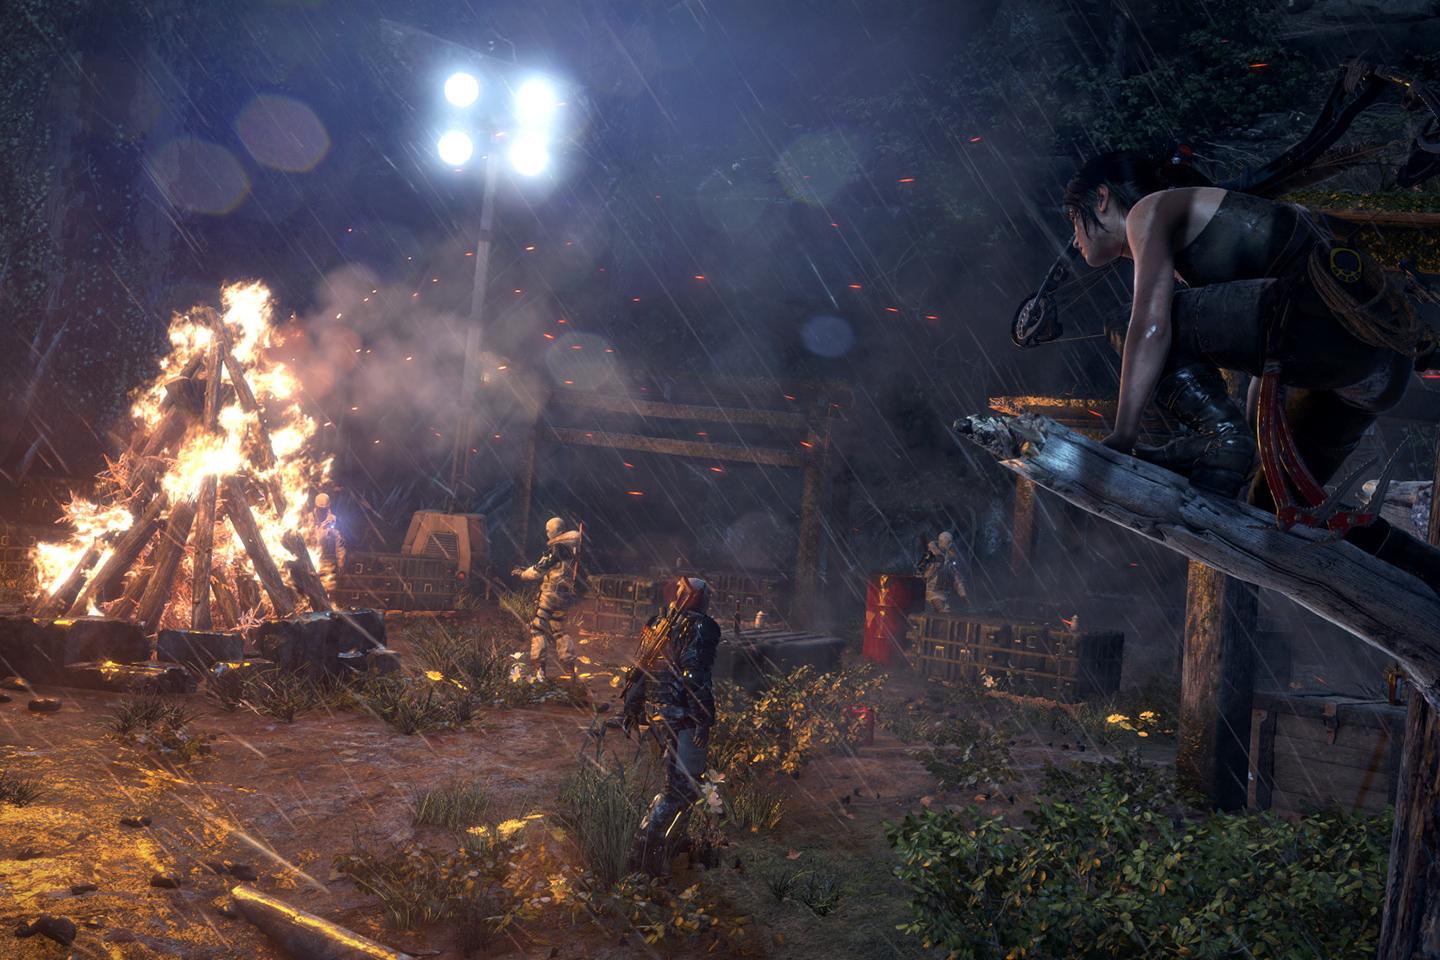 A nighttime scene from a Tomb Raider game capturing Lara Croft stealthily preparing to ambush an enemy by a bonfire in a rain-soaked, makeshift camp.